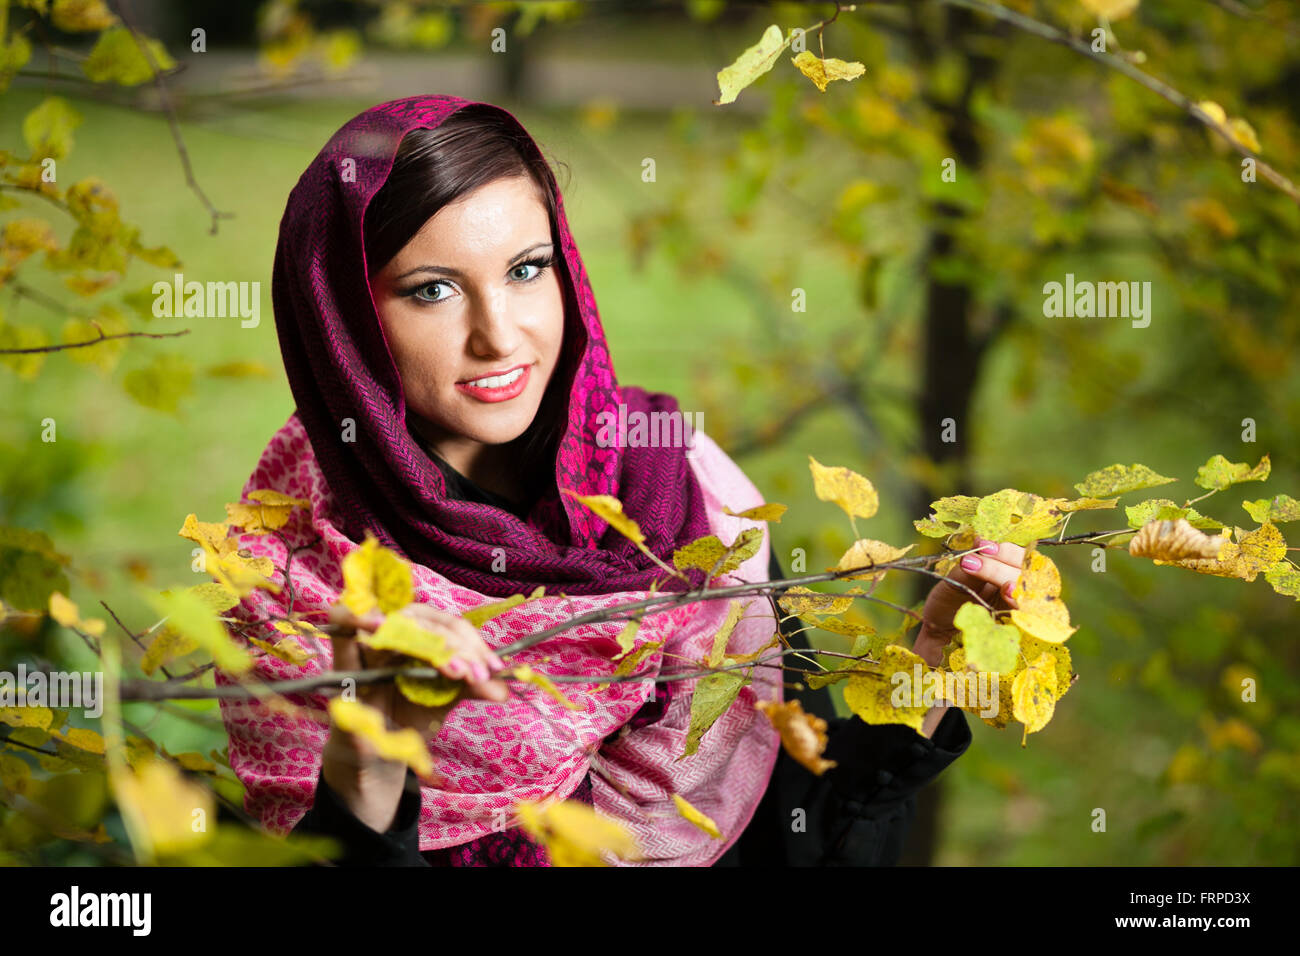 Girl in scarf at autumn park. Stock Photo